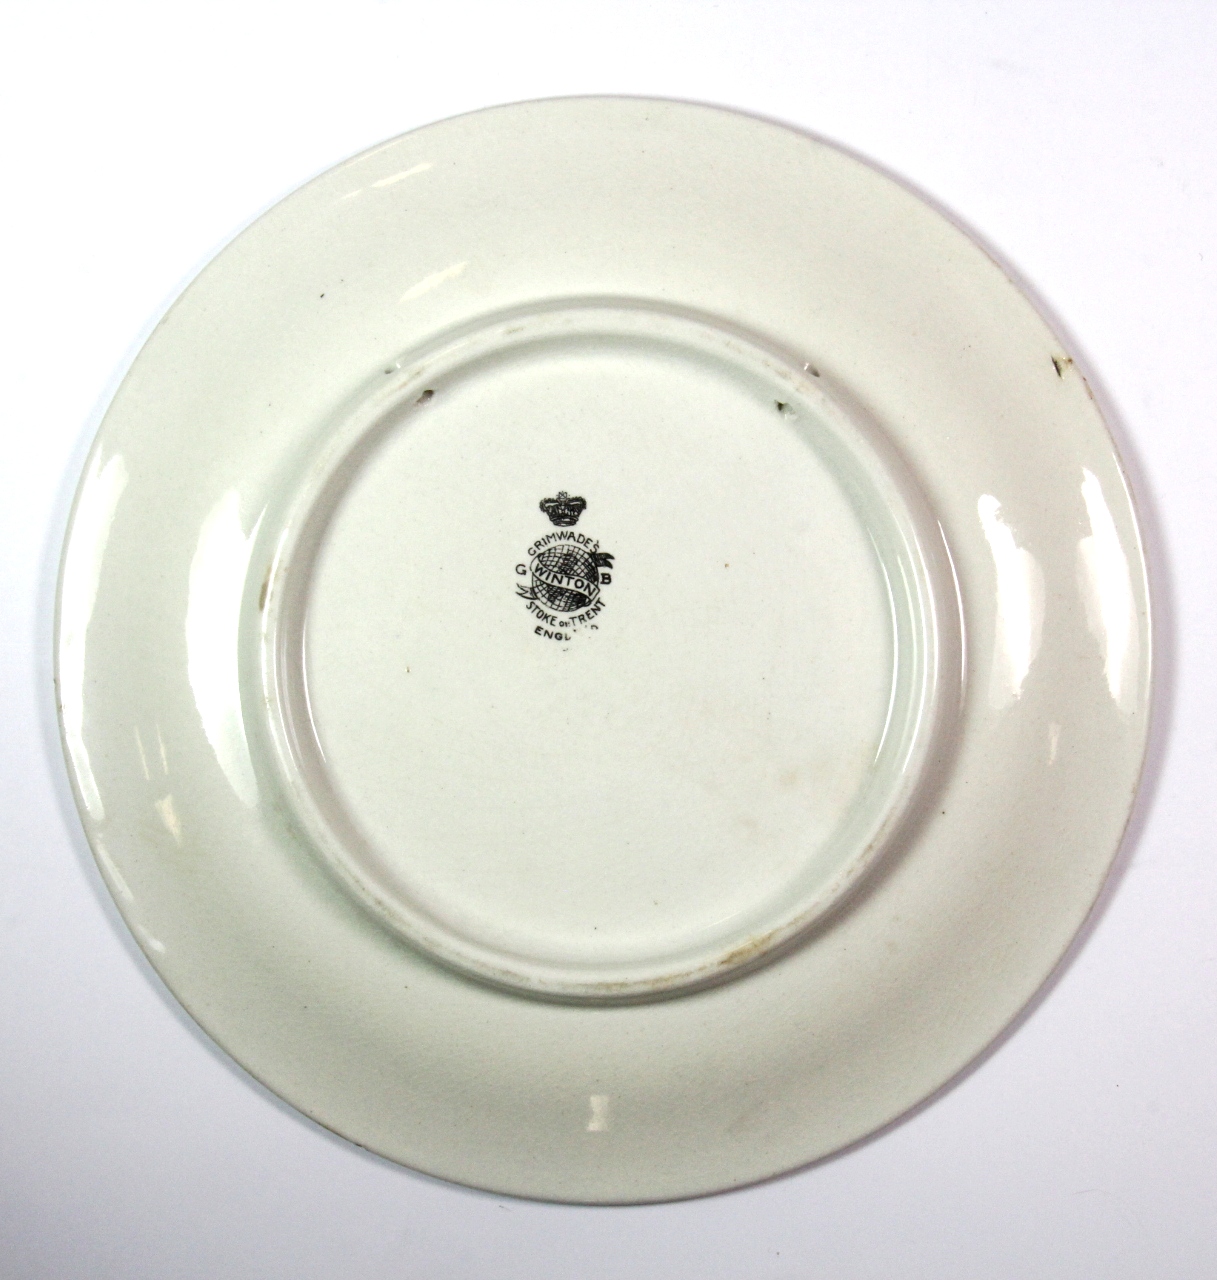 A 1918 Grimwades WWI Victory plate, Dia. 19.5cm. - Image 2 of 2